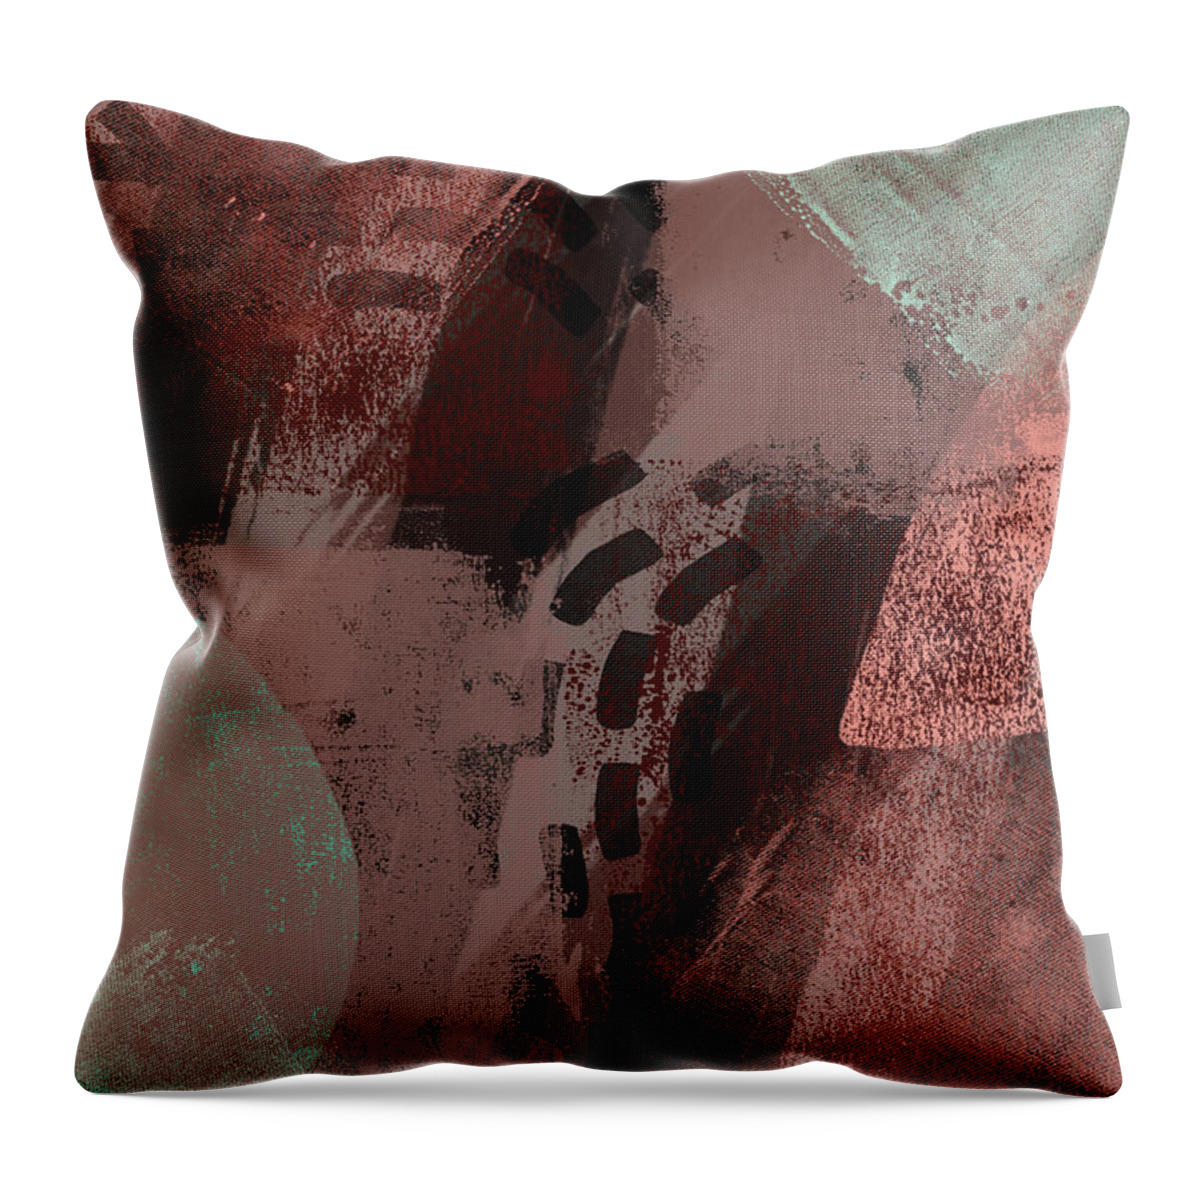  Throw Pillow featuring the digital art Walking the Path by Michelle Hoffmann